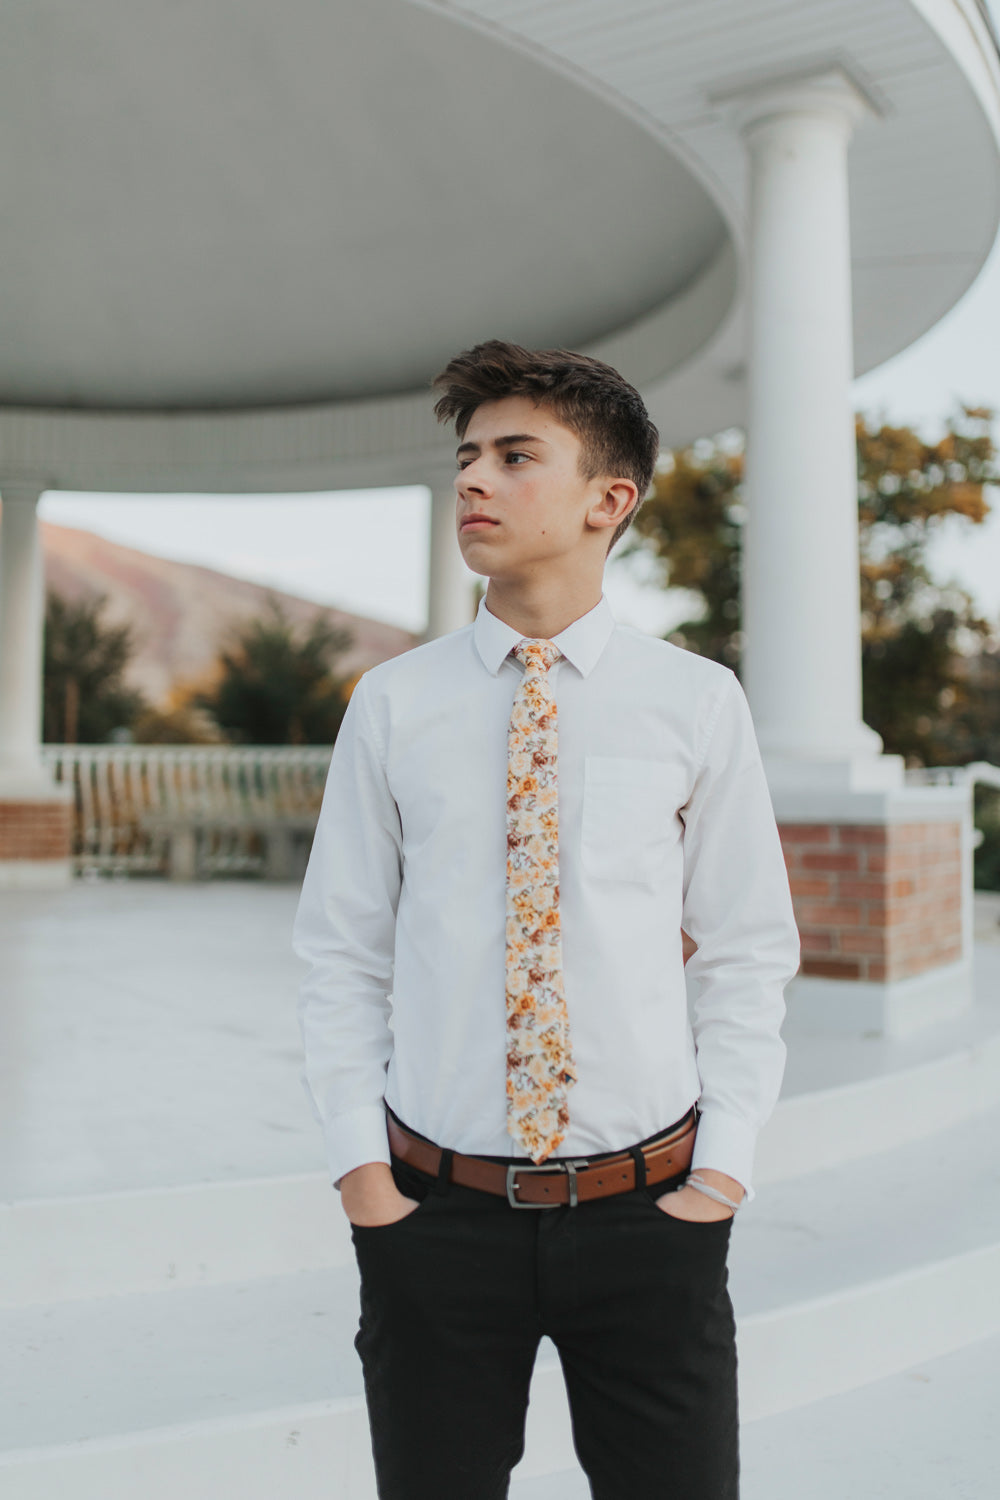 Autumn Cascade Tie worn with a white shirt and black pants.